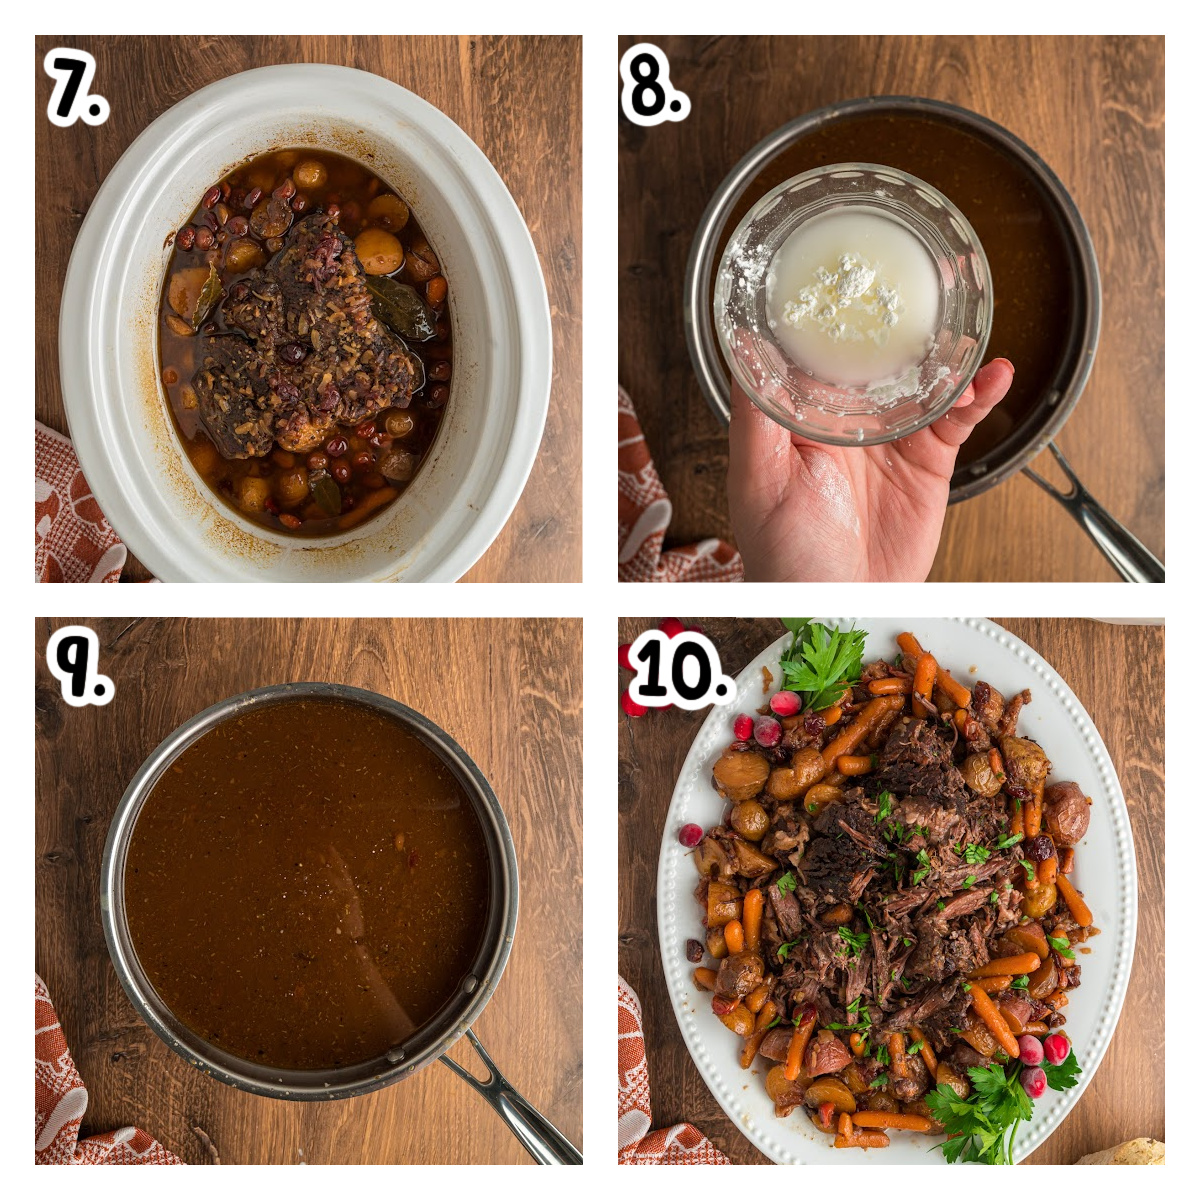 Images showing how to make gravy for cranberry pot roast and also how to plate it.